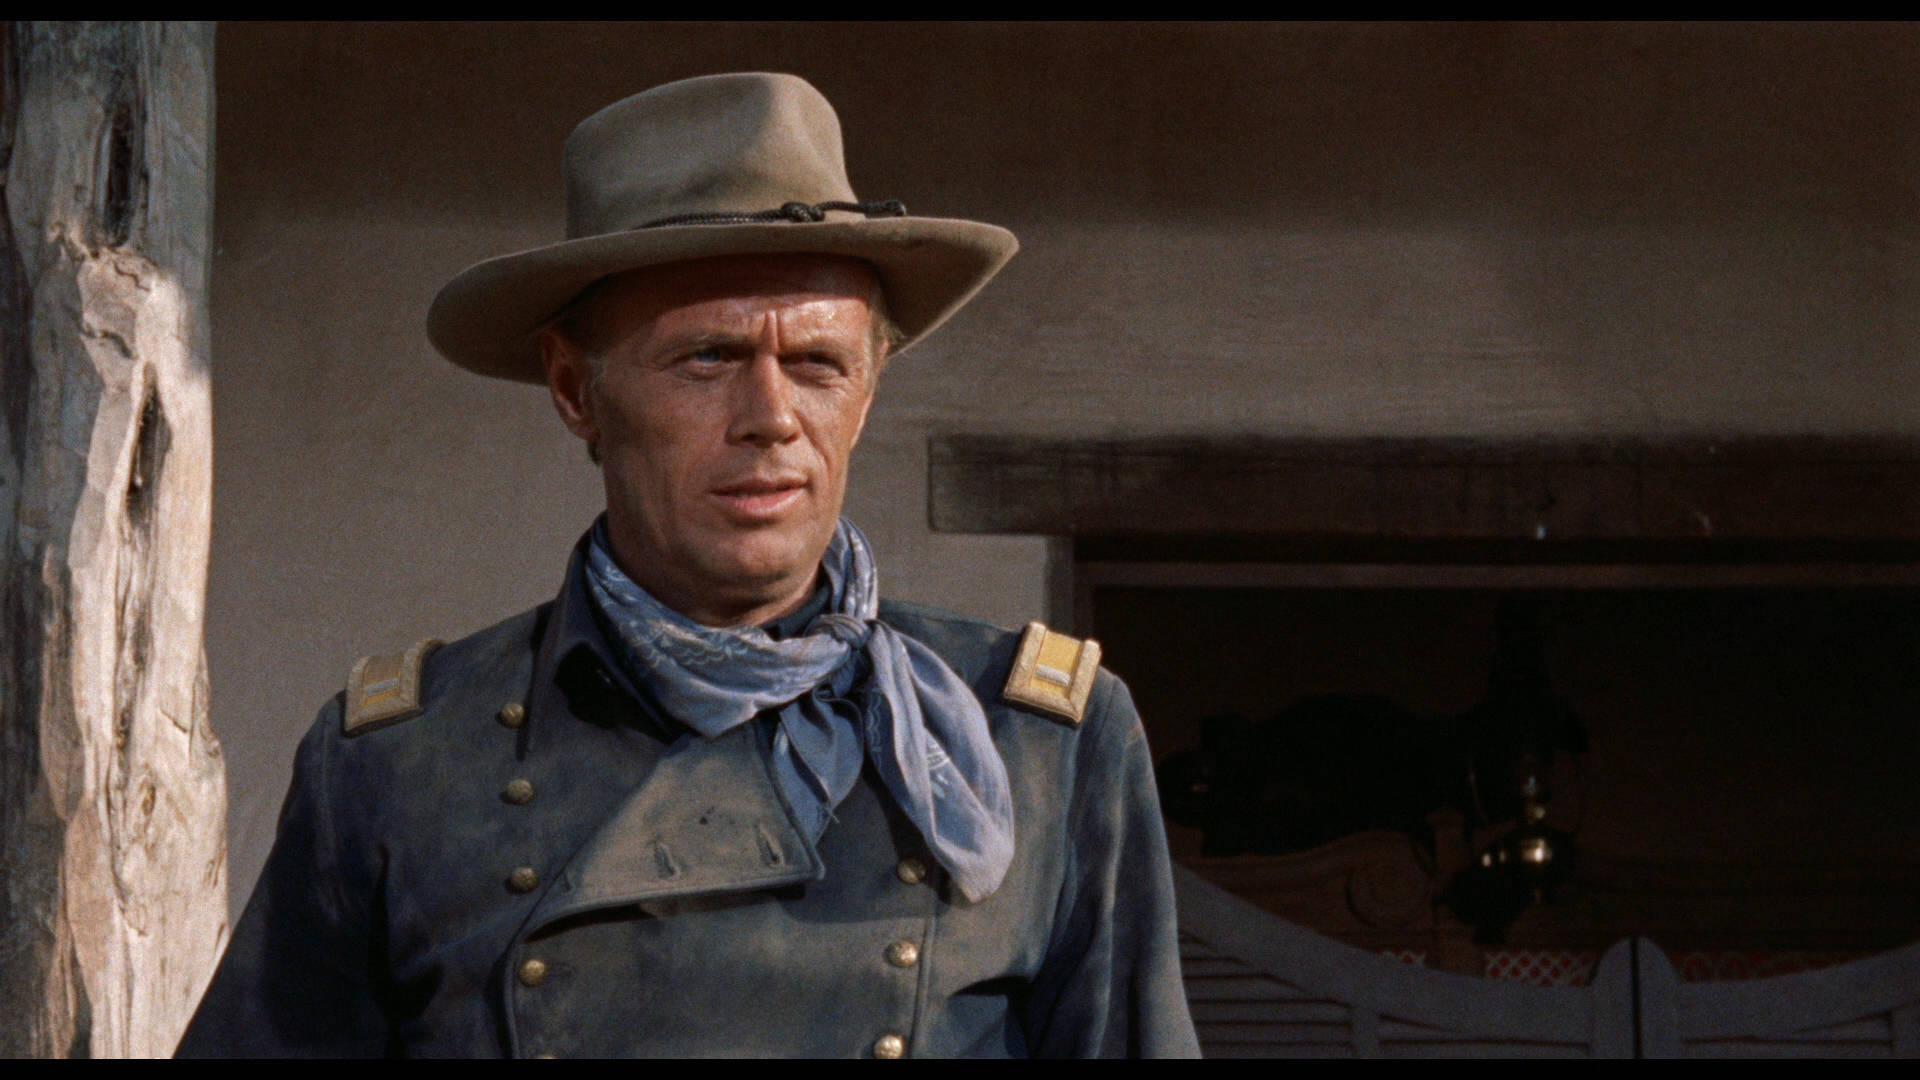 Classic Hollywood Actor Richard Widmark in 'Two Rode Together' Wallpaper